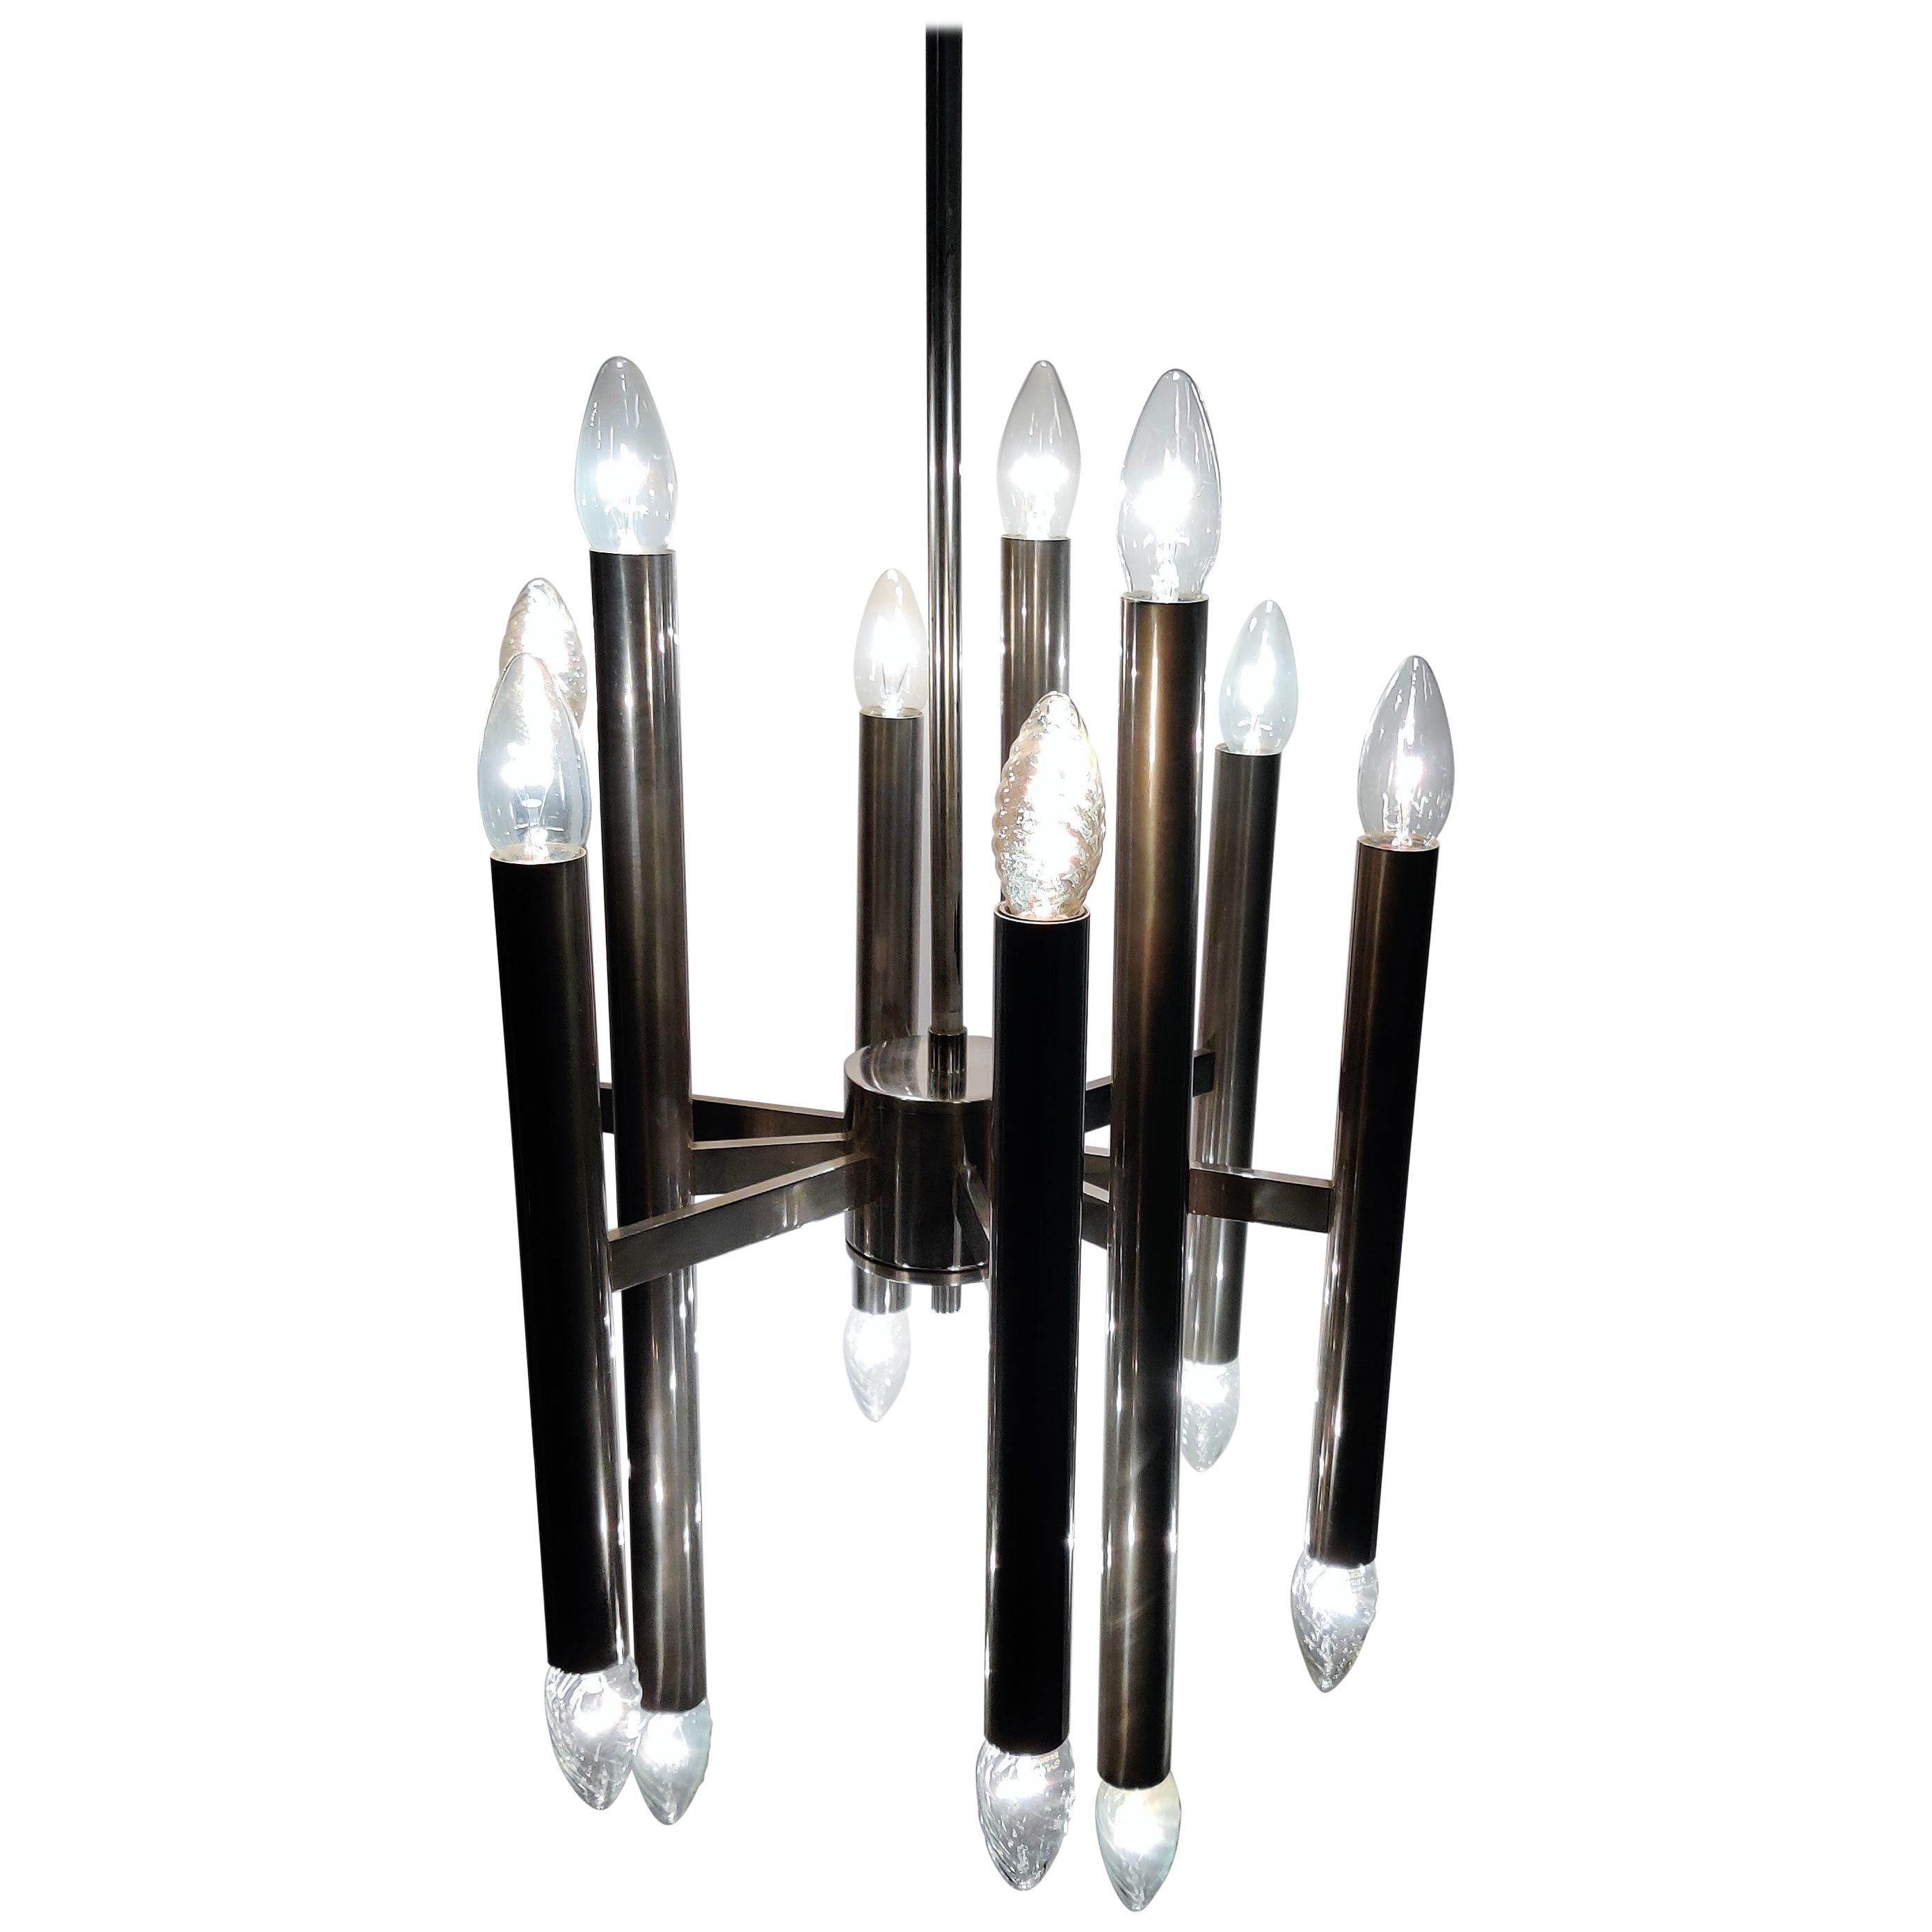 Vintage Gaetano Sciolari Candle Chandelier Made from Chrome, 1970s